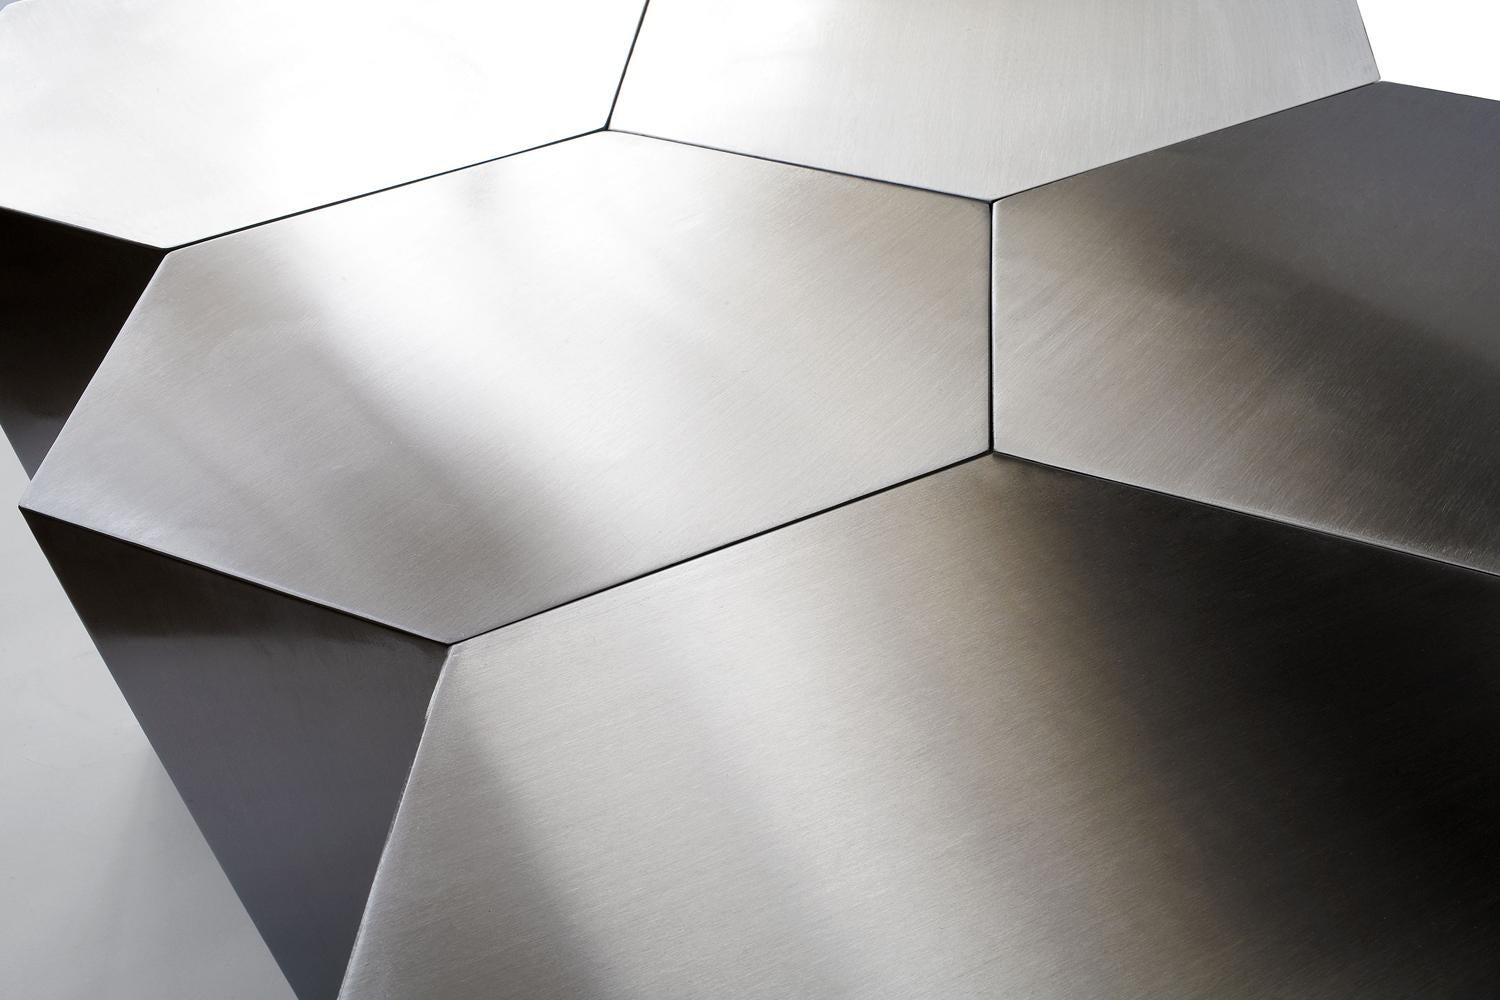 The Hex table explores systemic ordering and modular relationships: each stainless steel pod fits precisely alongside others, offering infinite possibility for the table's ultimate configuration and size. While embracing the modern need for